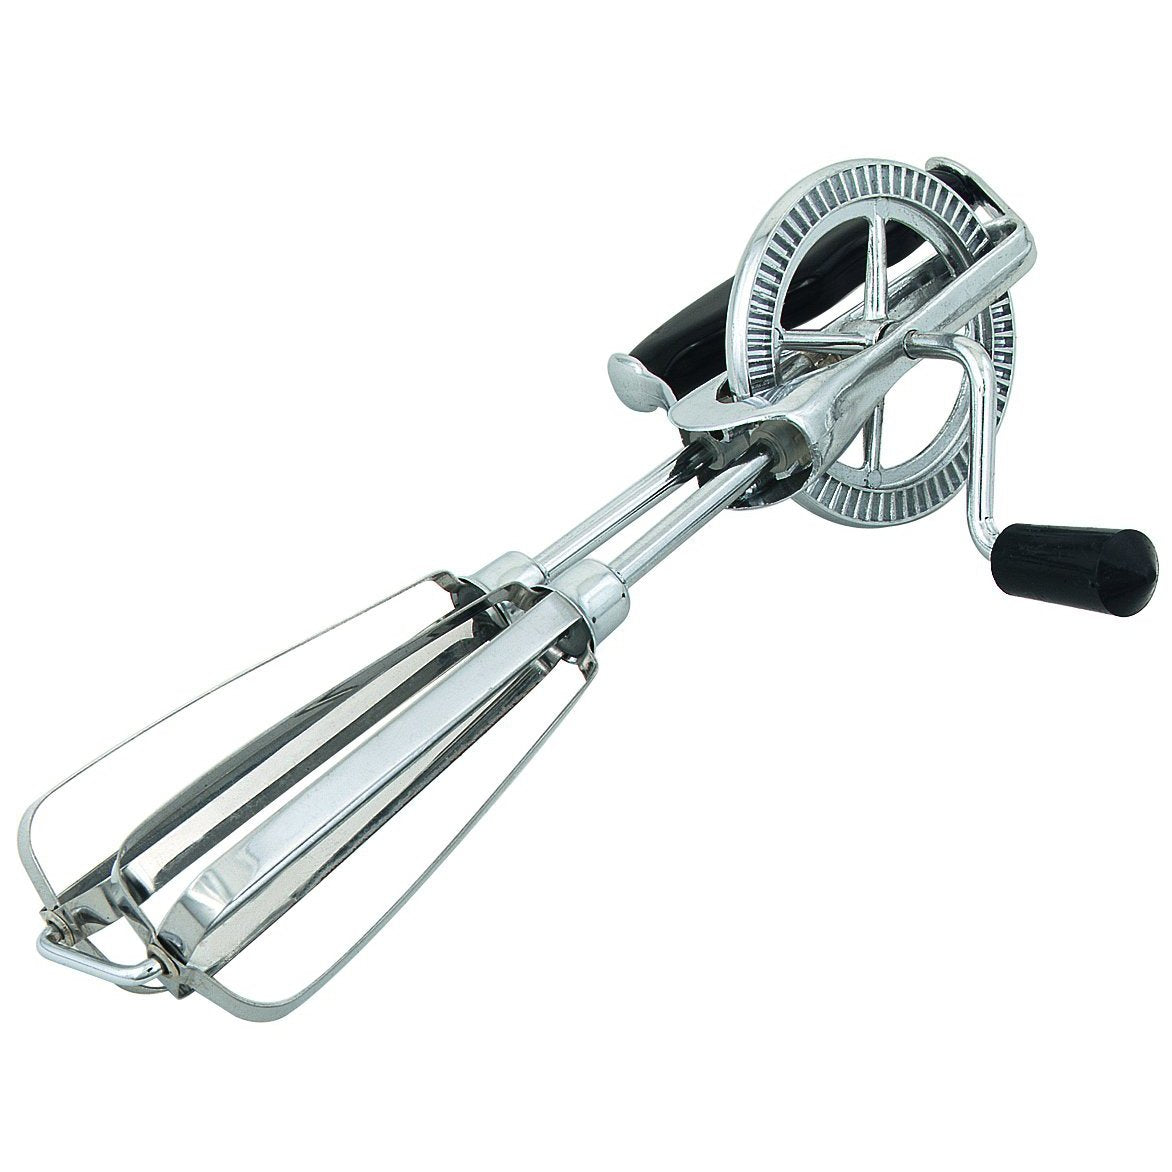 Starfrit Gourmet manual egg beater - Ares Kitchen Tools